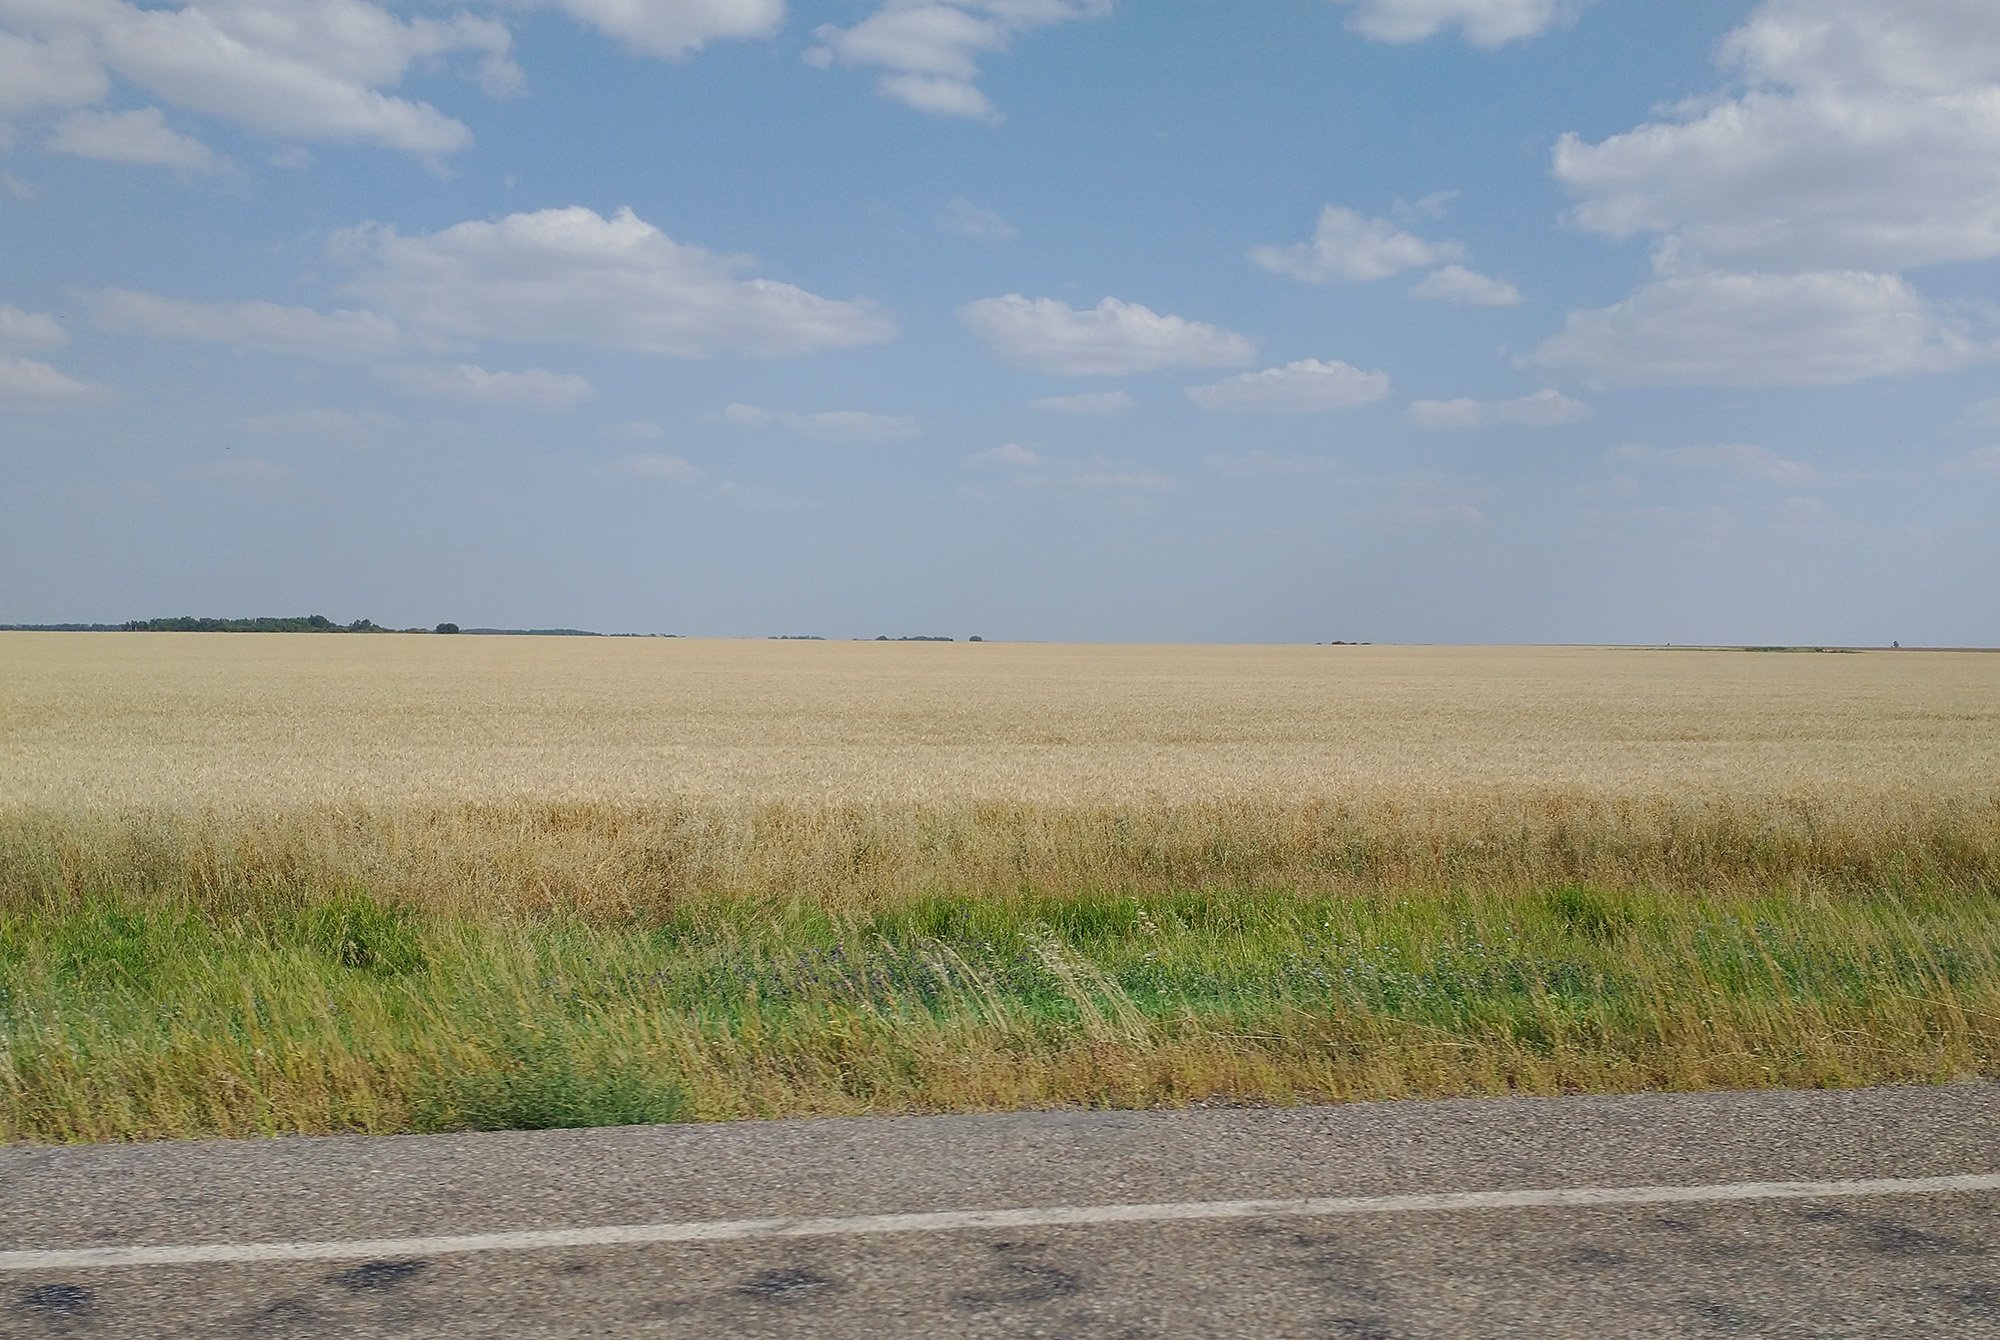 This is as representative of Saskatchewan as I can get. Blue skies, flat, yellow fields.